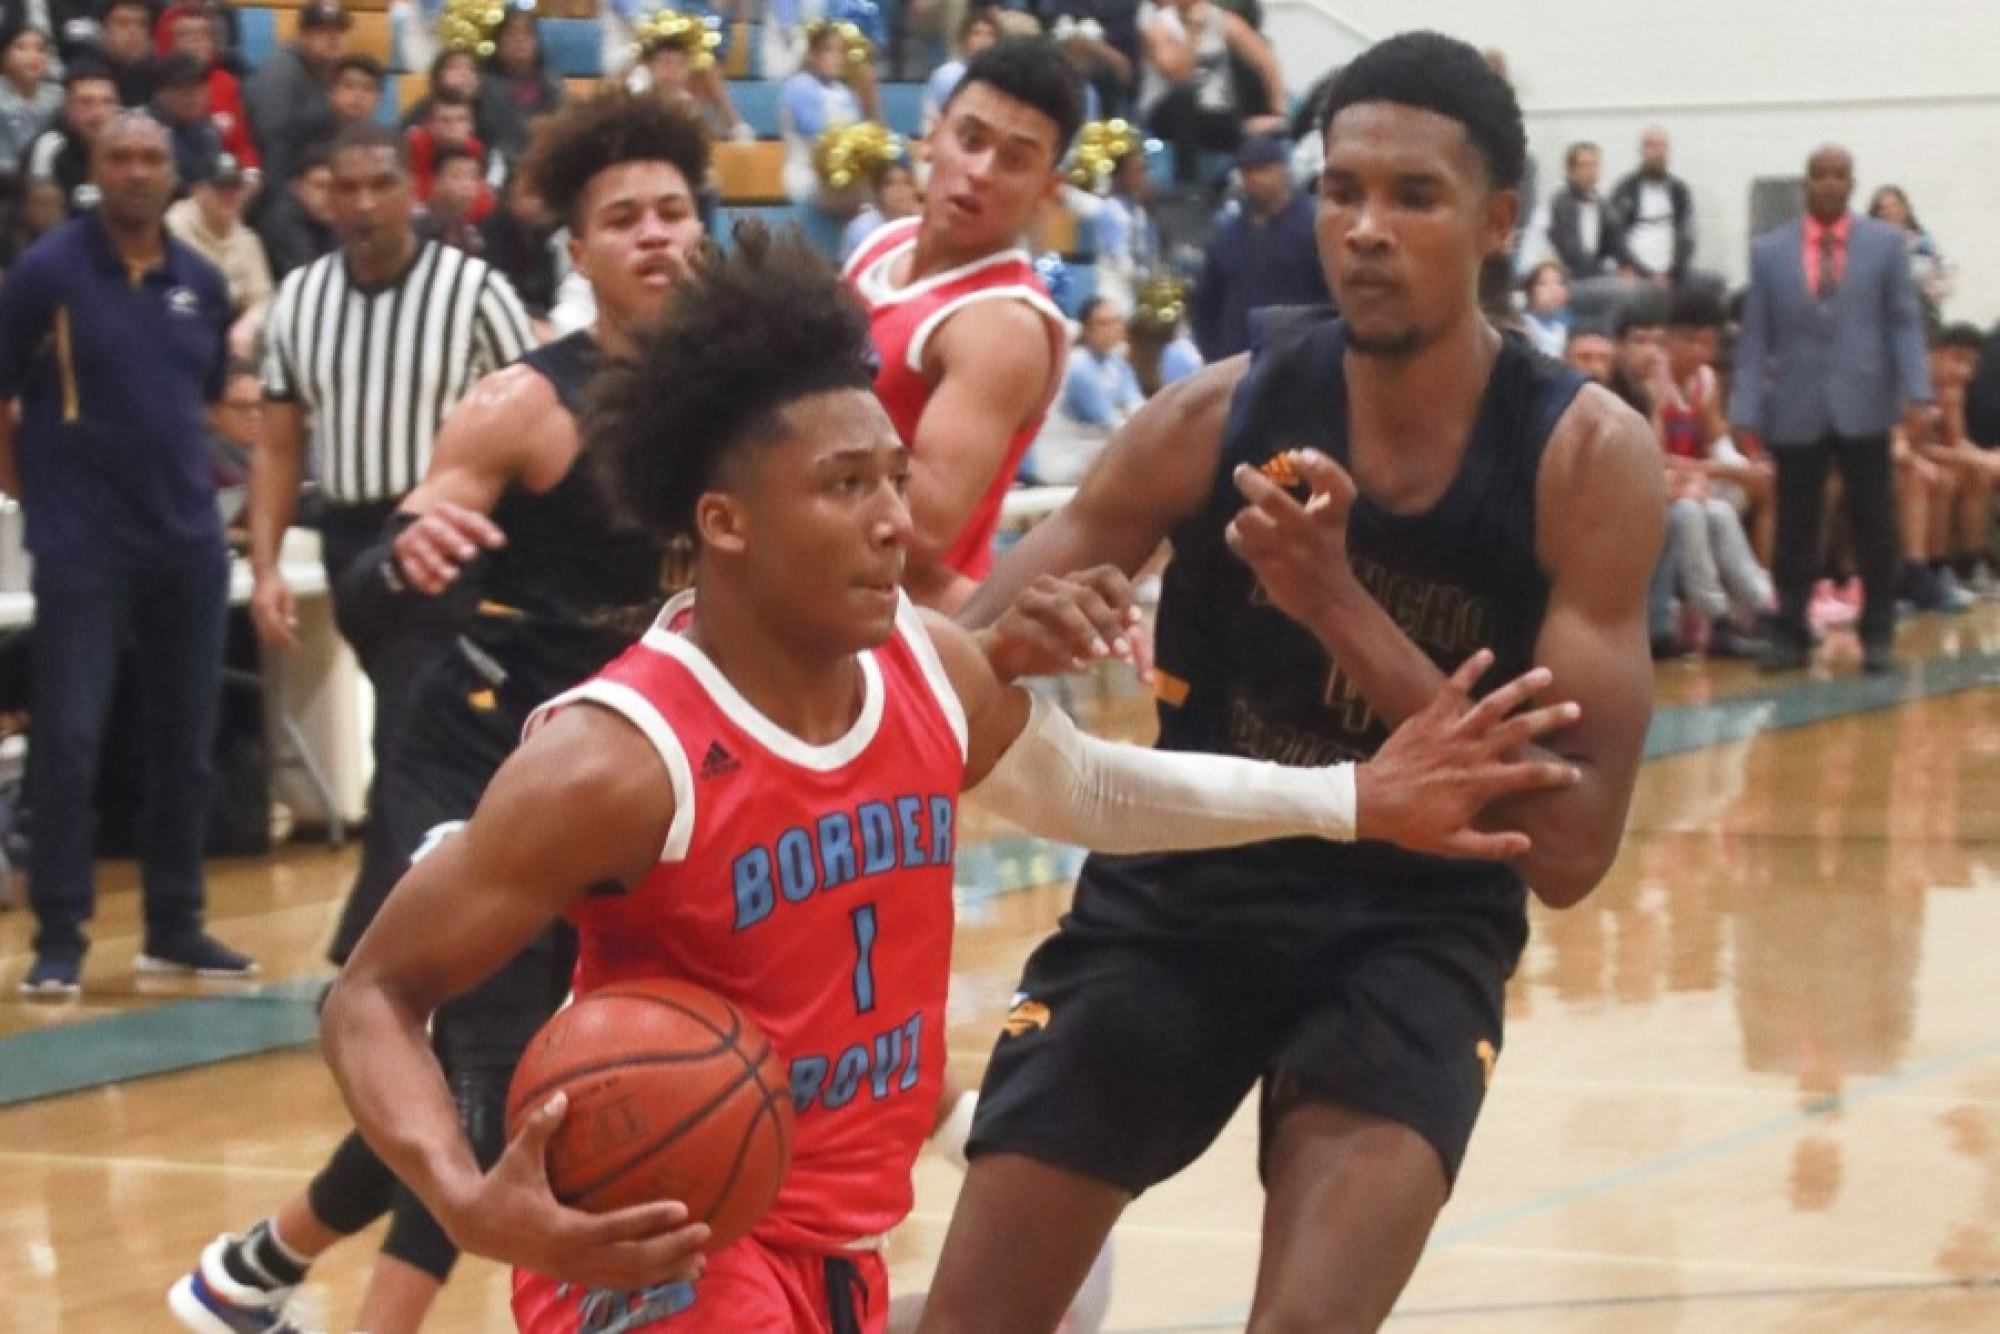 Evan Mobley is living up to the hype in his sophomore season